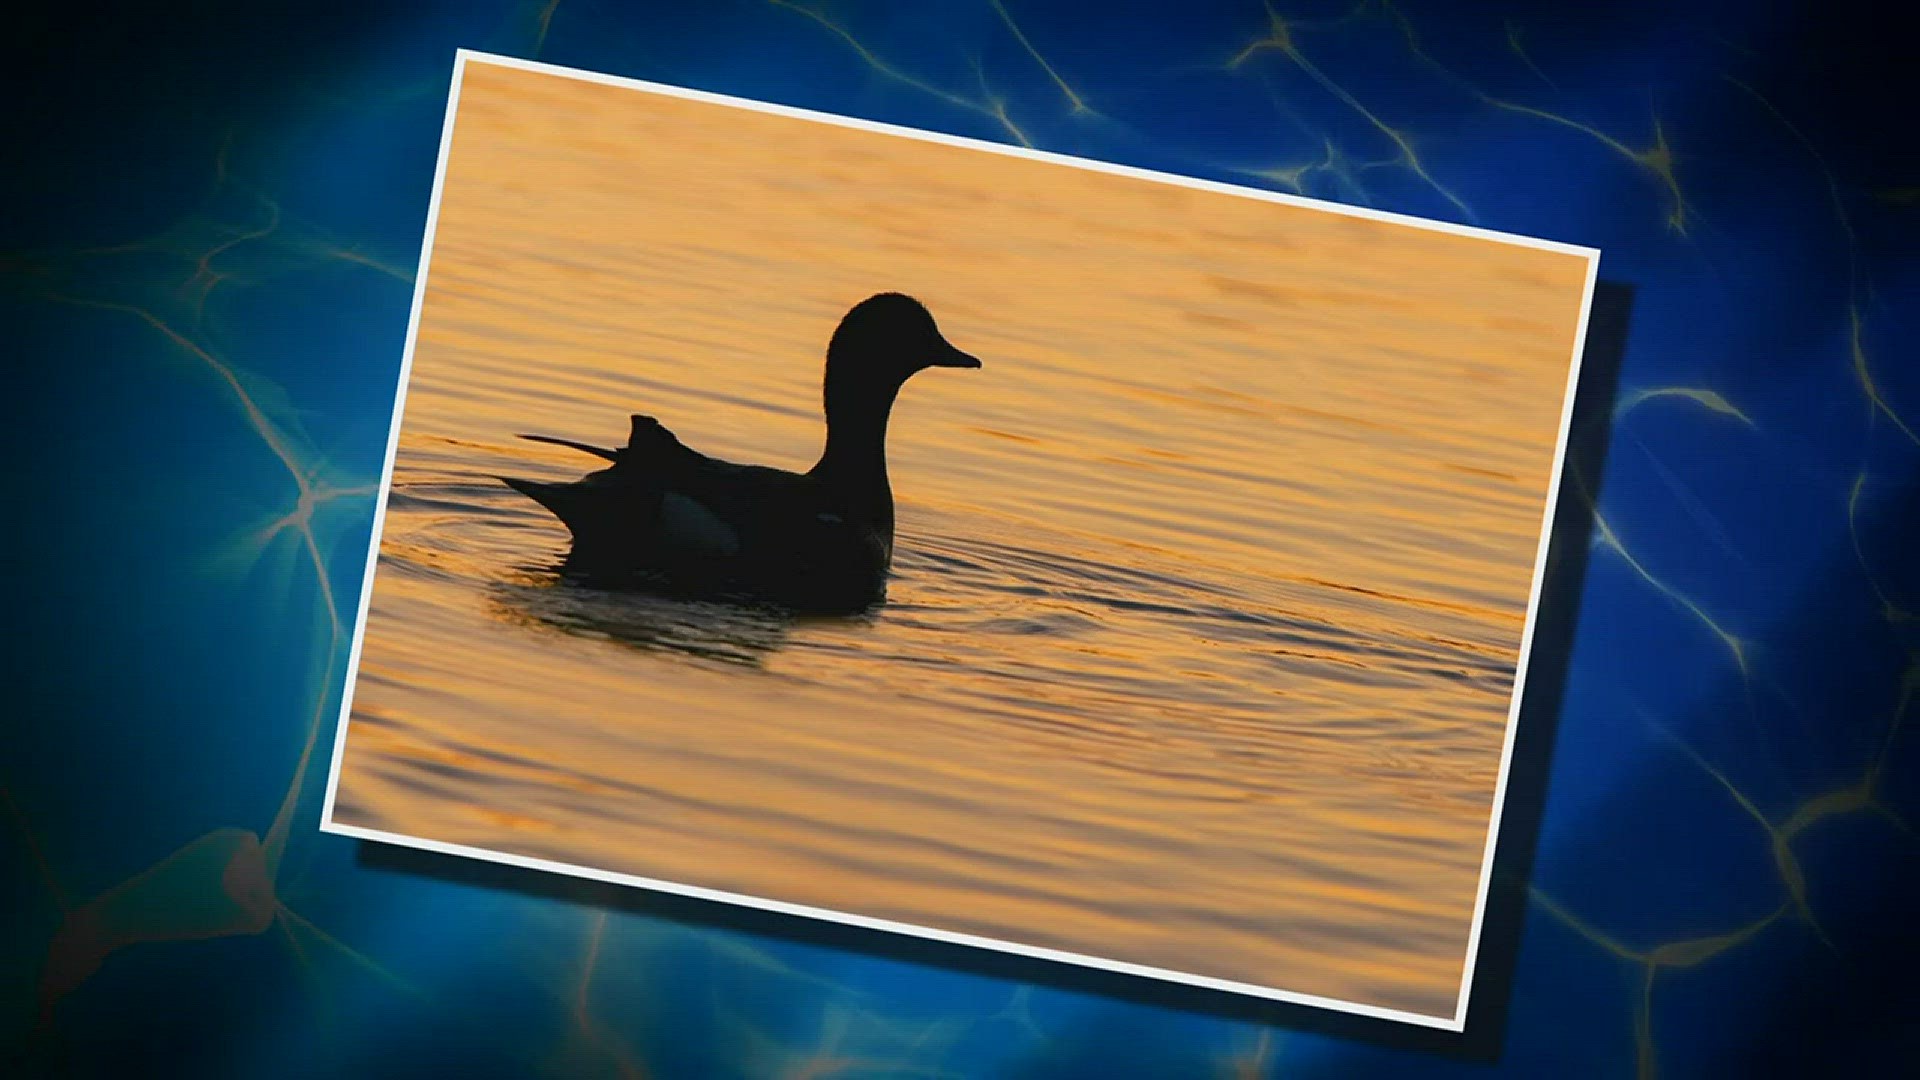 Is it goose or gray duck? Chris Hrapsky set to find out. http://kare11.tv/2xw39wh